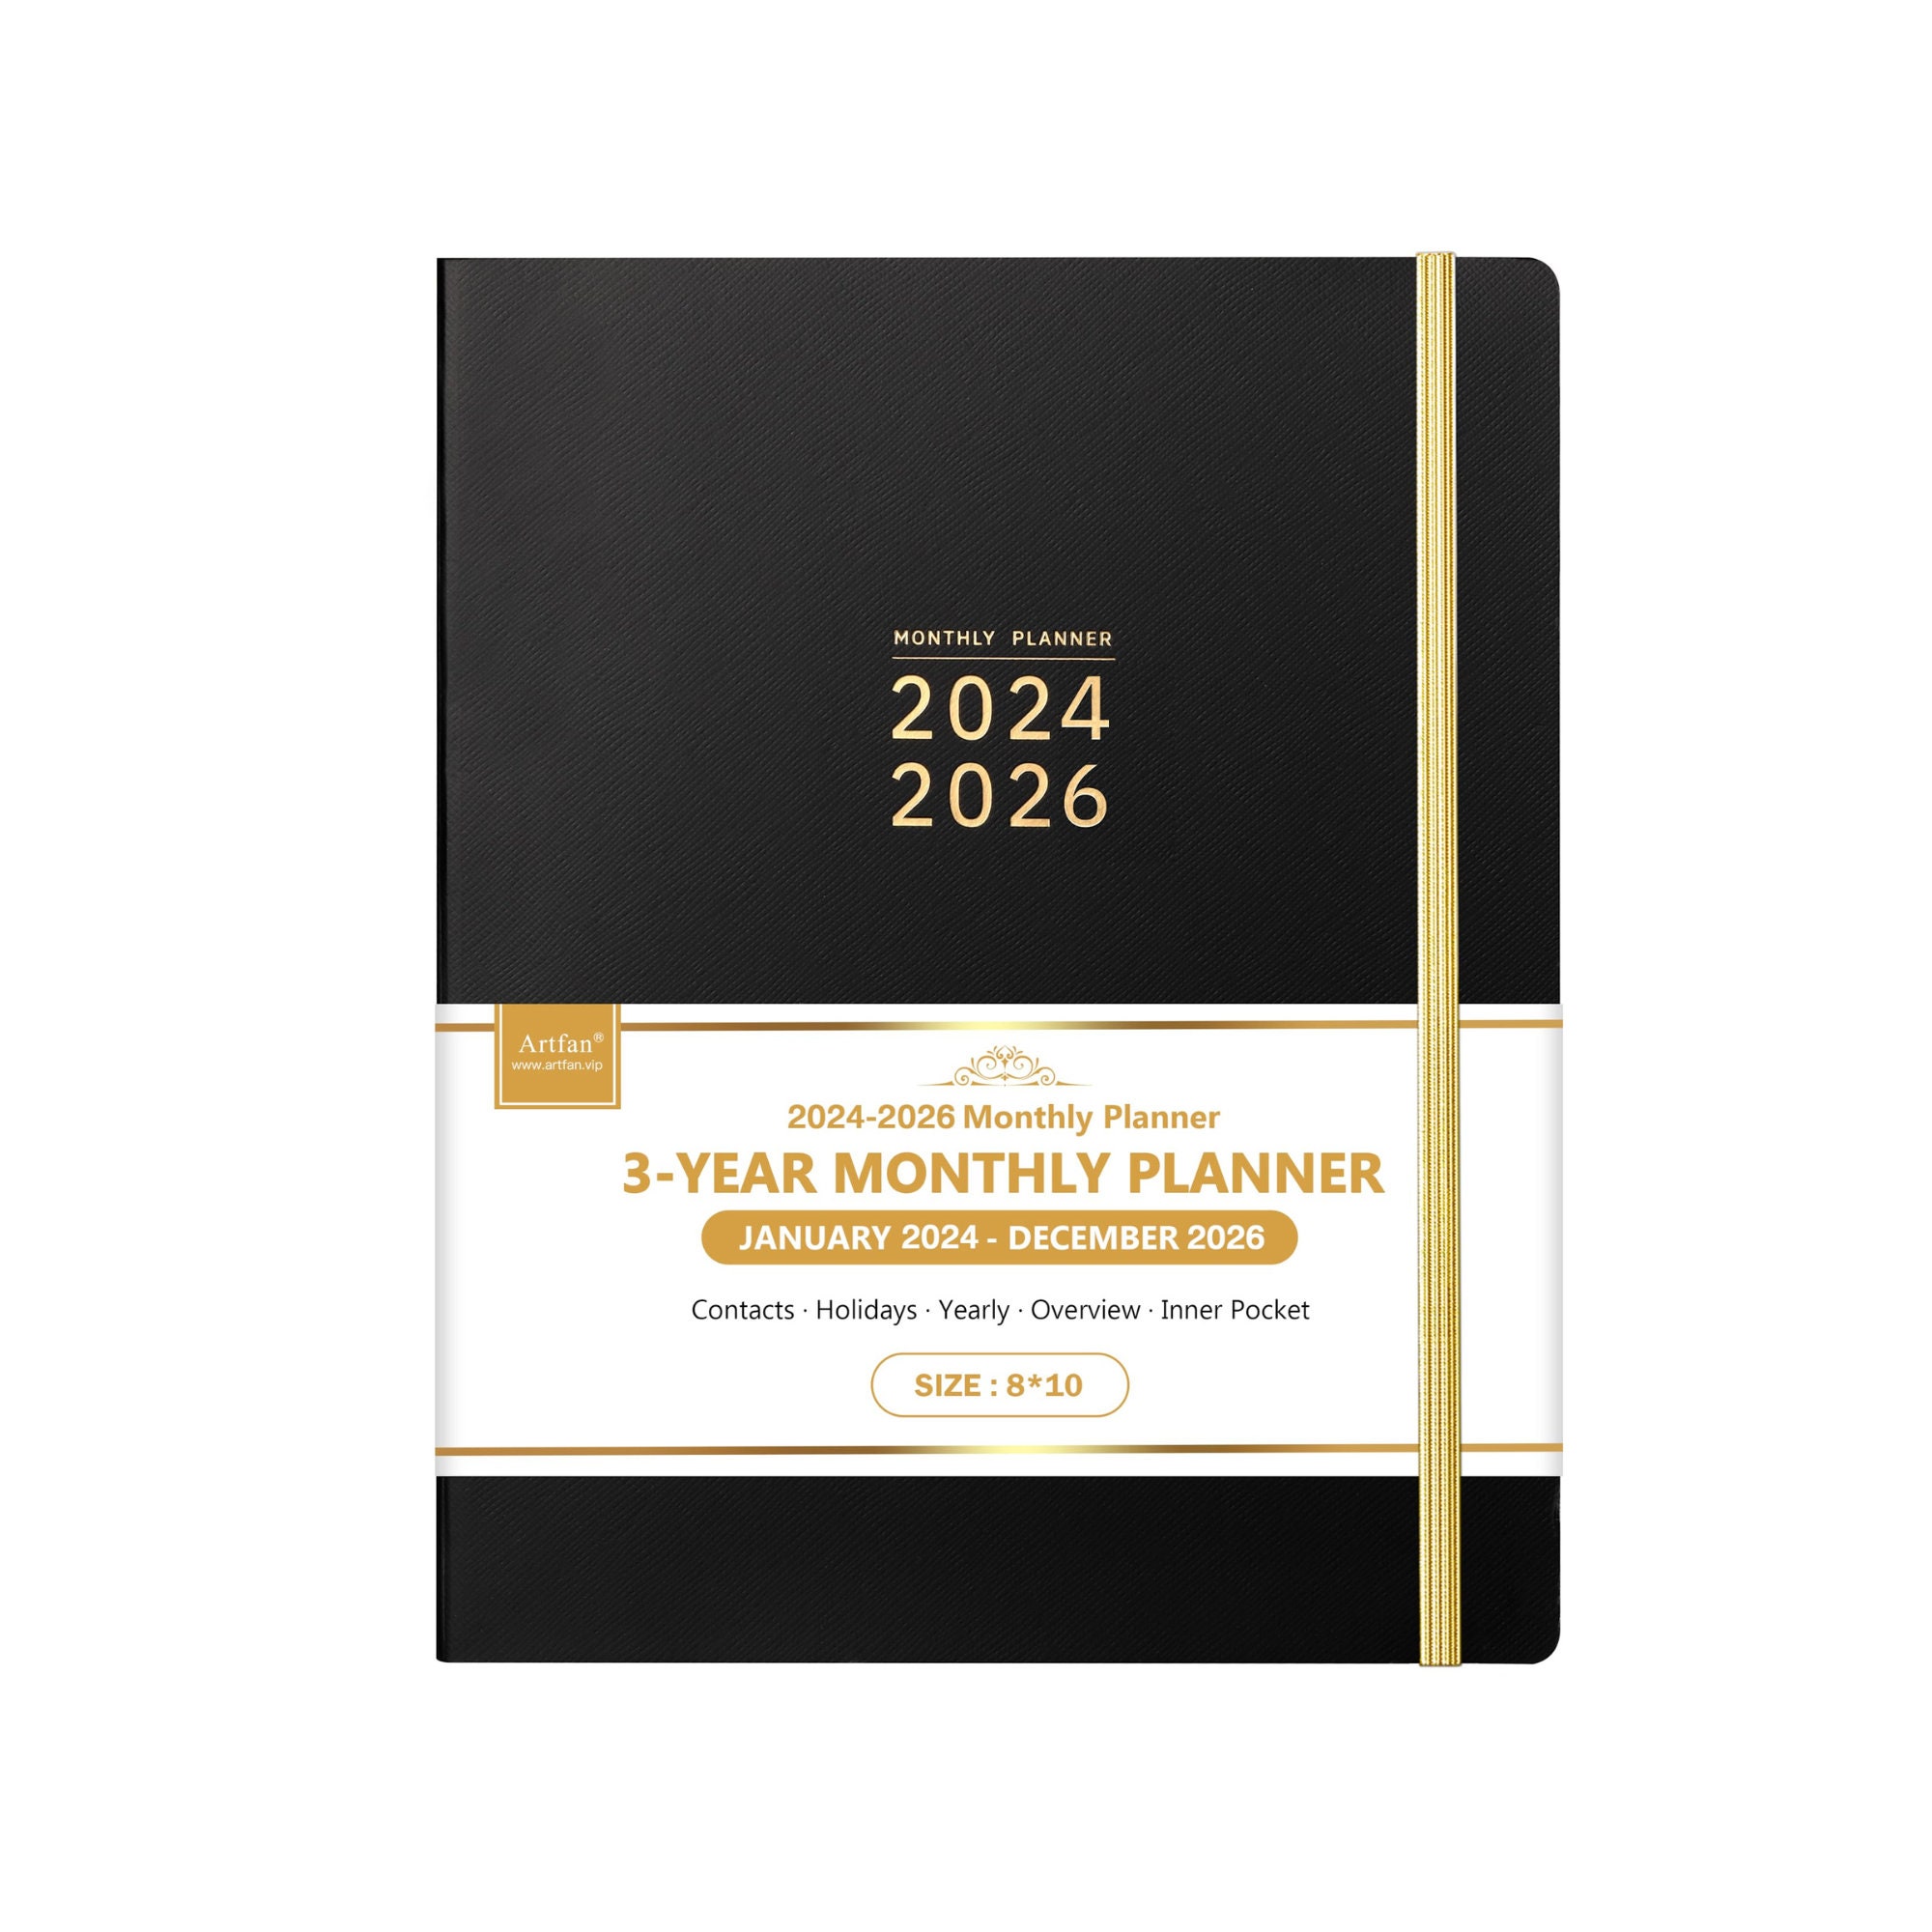 Pocket Calendar 2024 - 2026 With Moon Phase: Three-Year Monthly Planner for  Purse , 36 Months from January 2024 to December 2026 | Thanksgiving